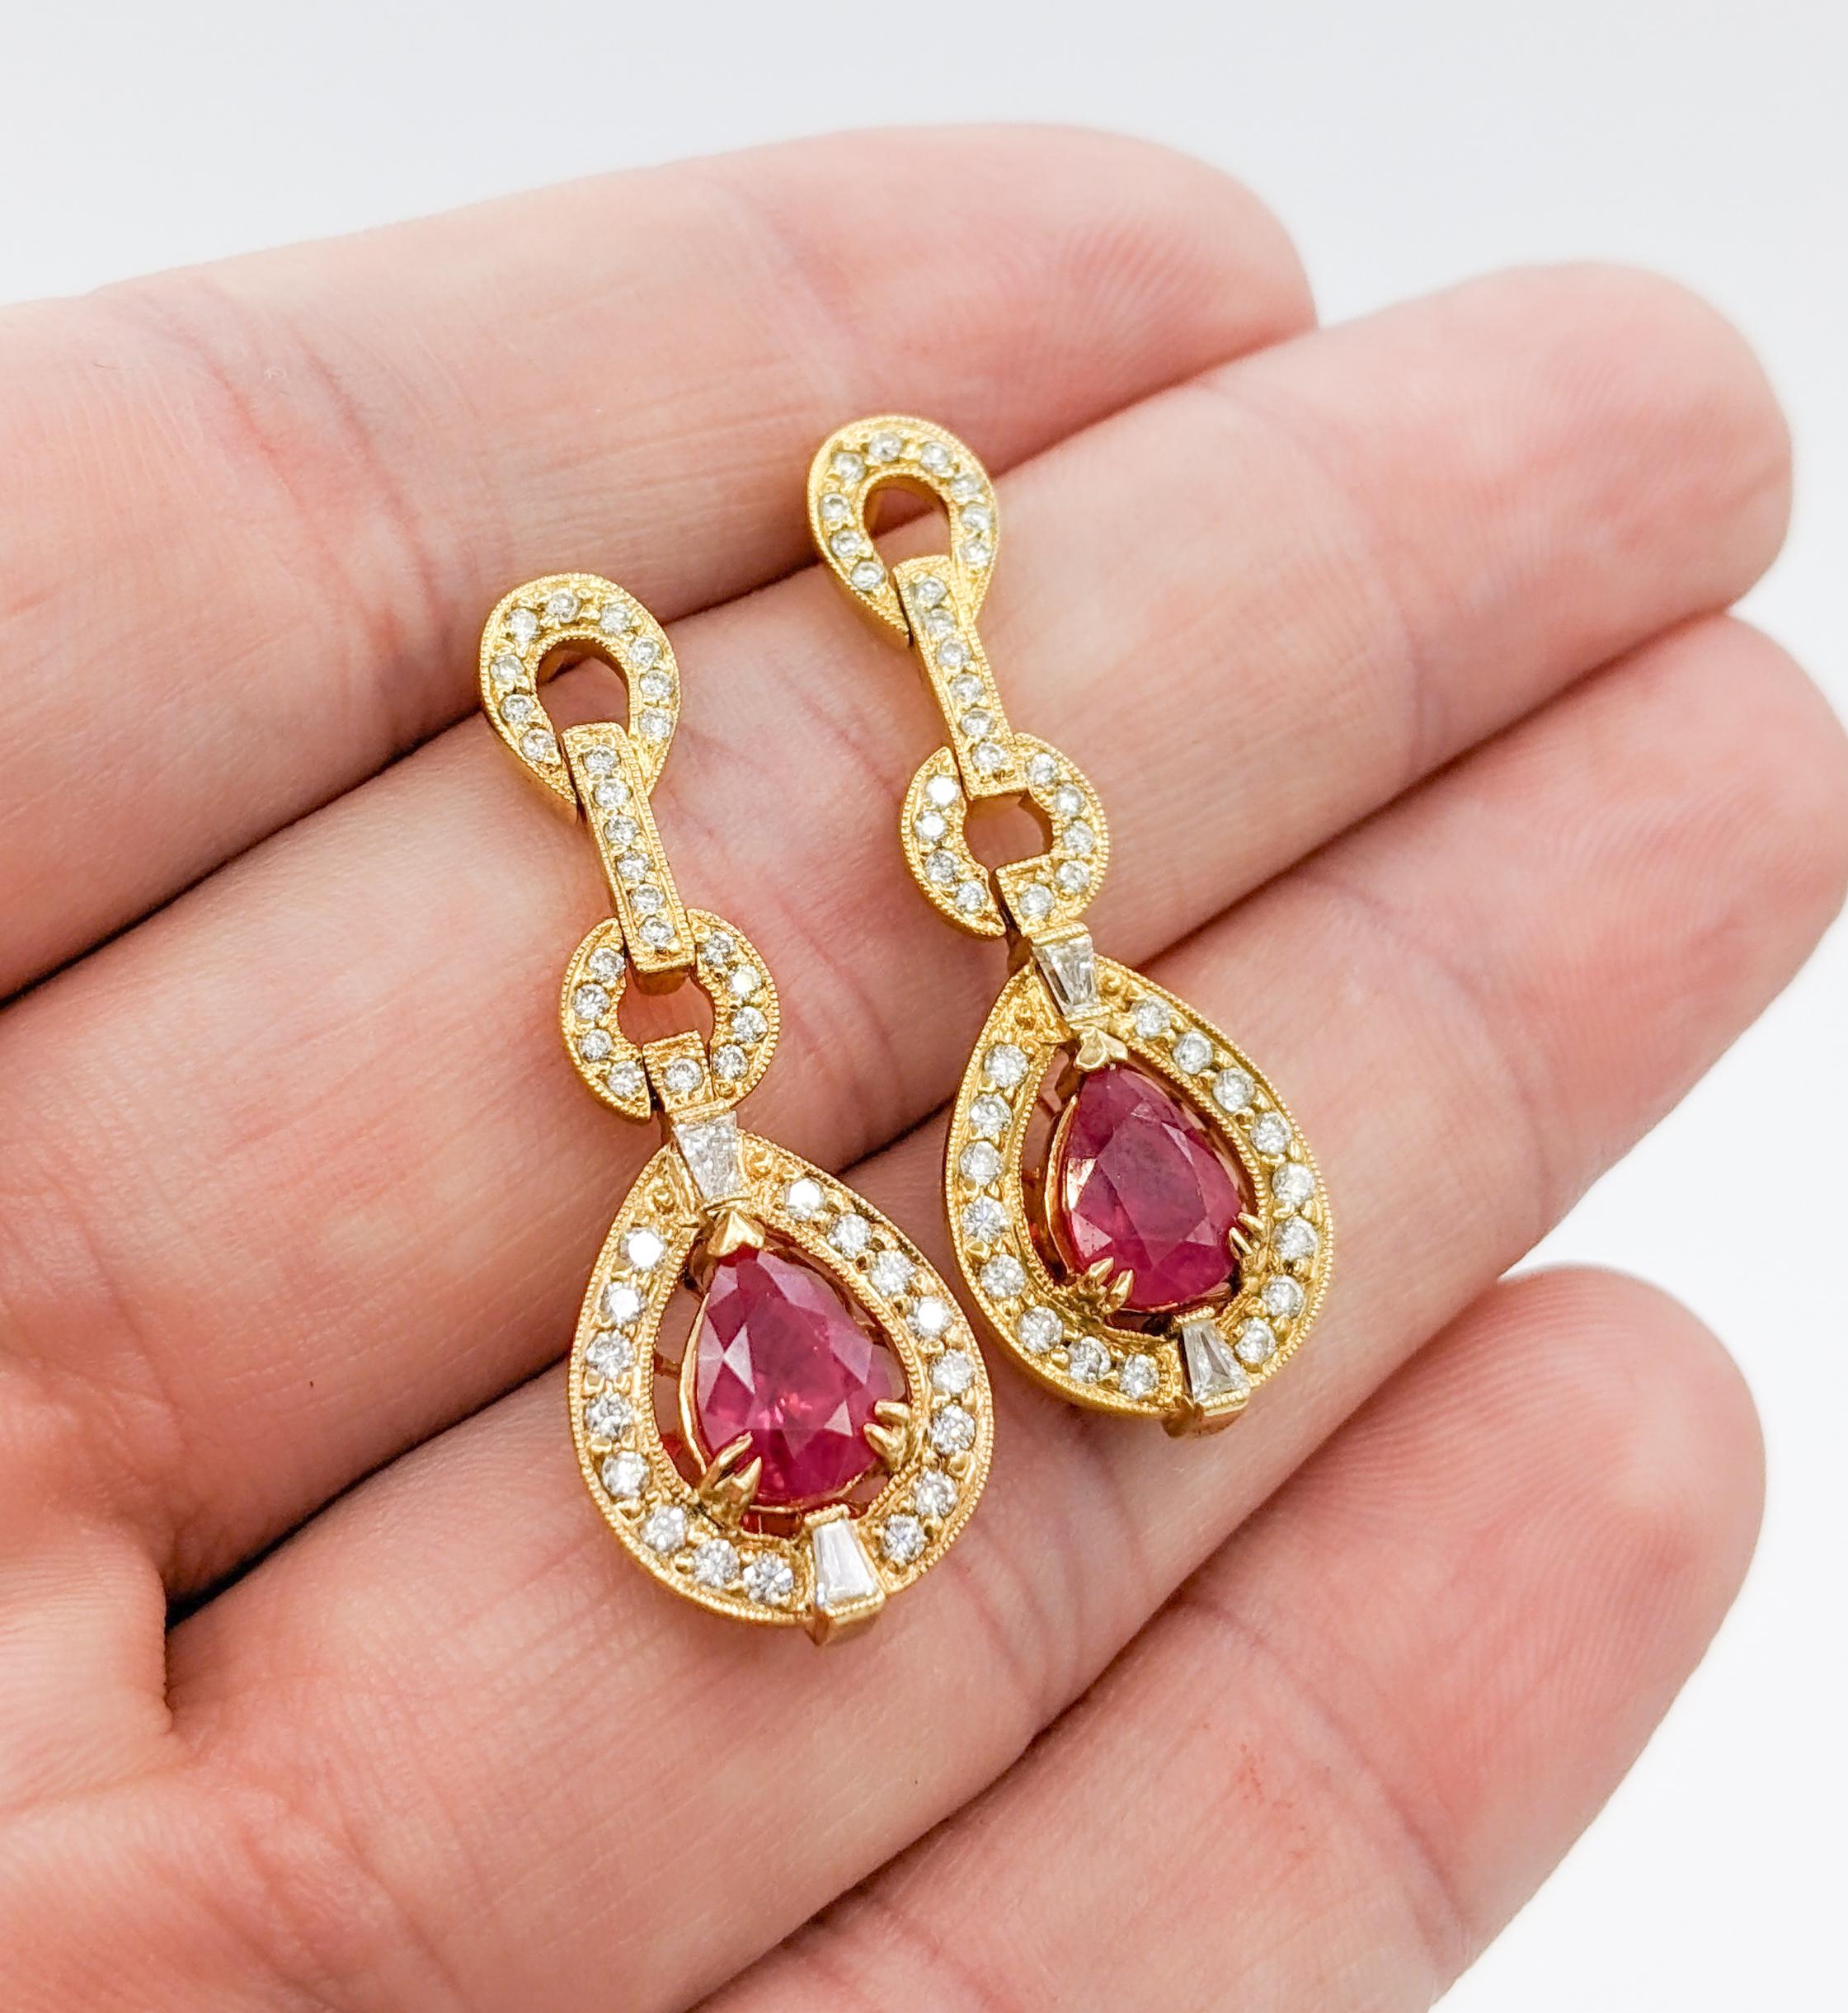 Classic 2.73ctw Ruby and Diamond Drop Earrings

These classic drop ruby earrings are made of 14kt yellow gold. They have .89ctw round white diamonds with a clarity of SI1 and a G-H color. The earrings also hold two noticeable pear-cut rubies with a